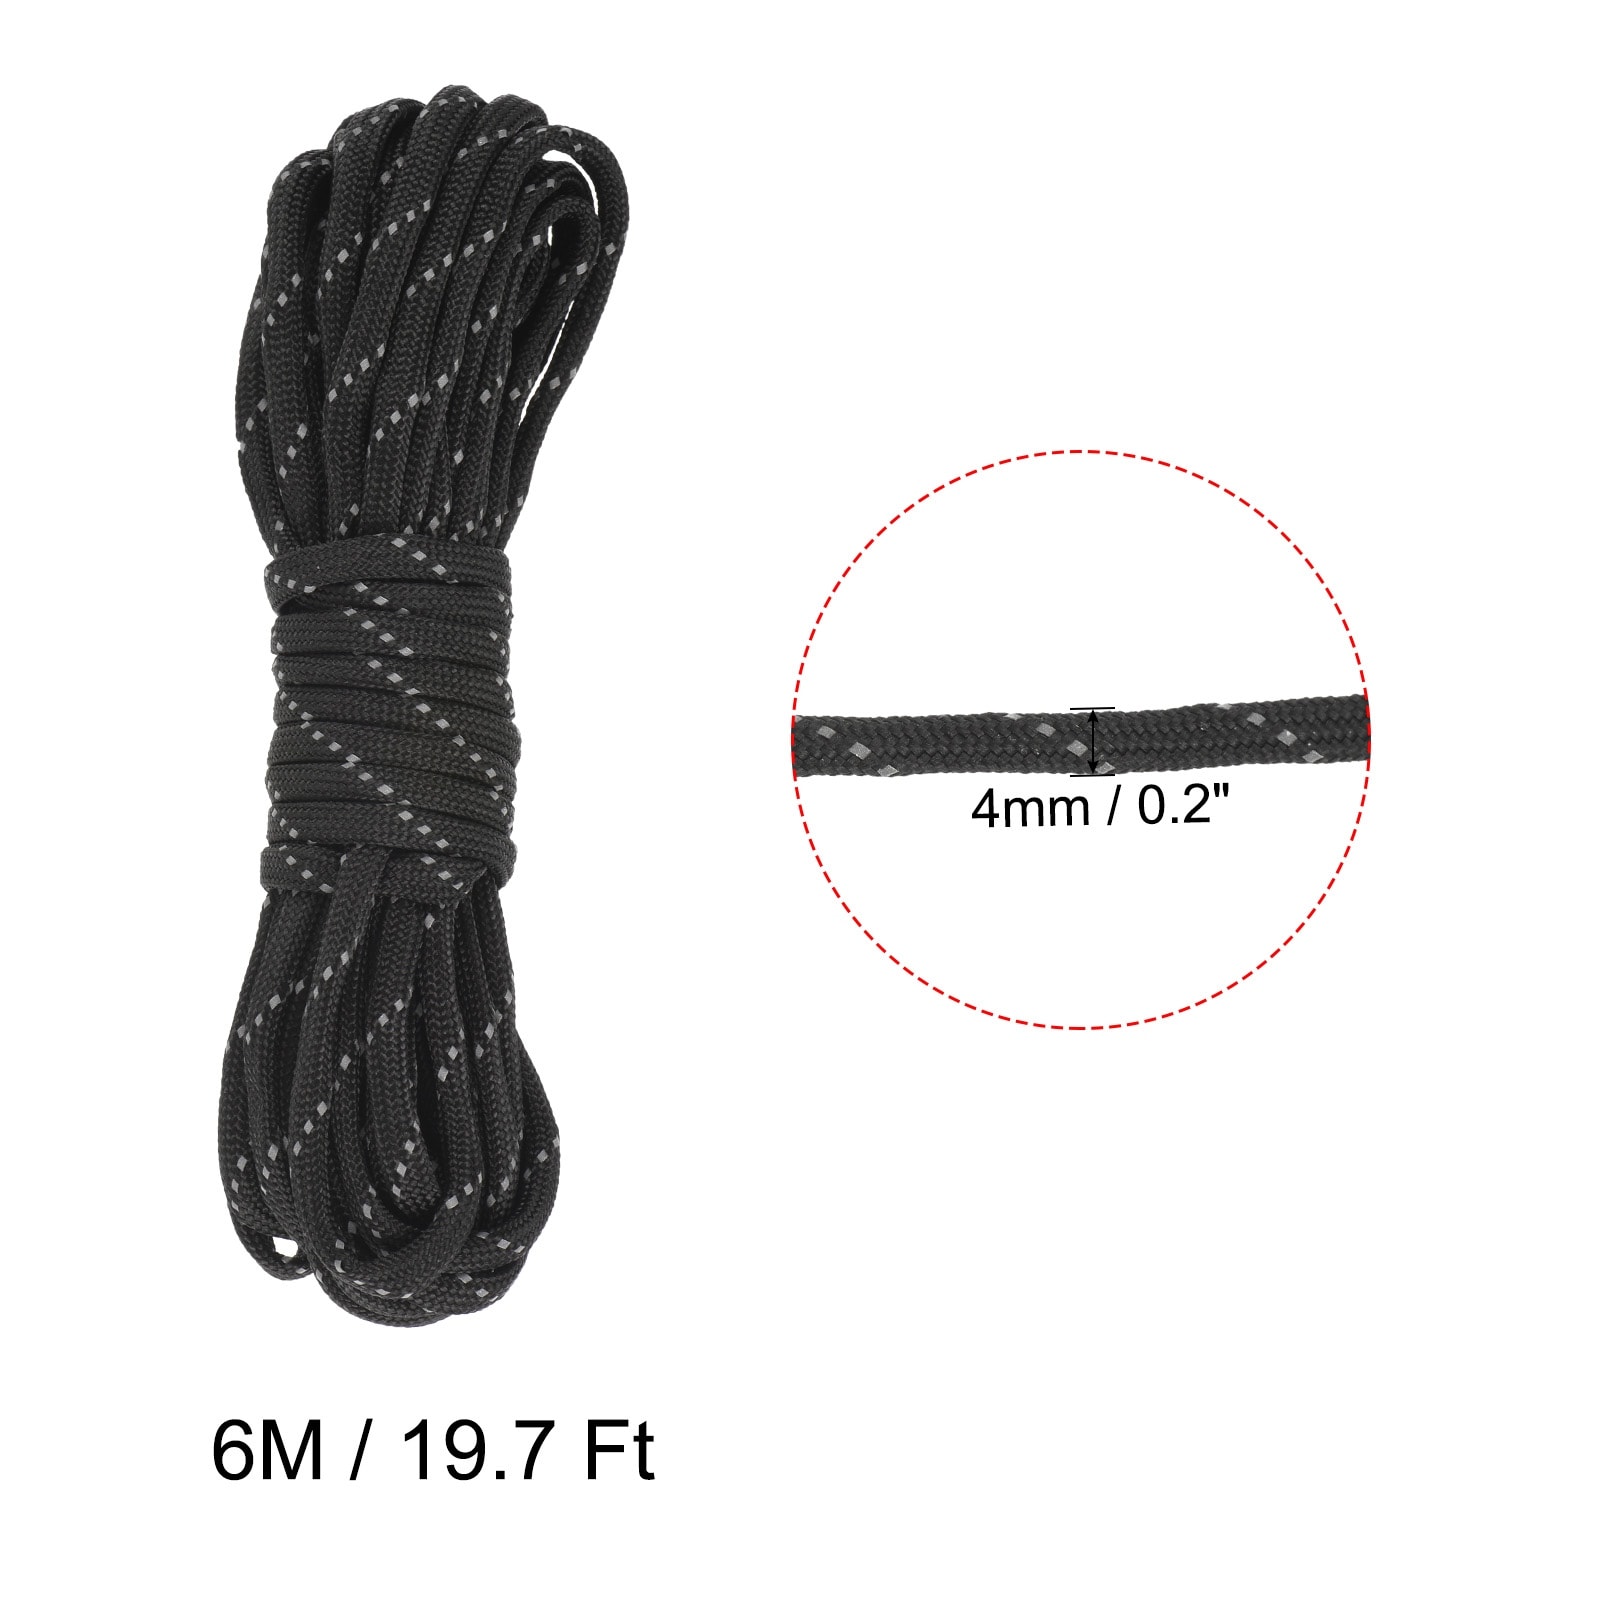 Unique Bargains Nylon Tent Rope Reflective Guyline Cords with Aluminum Cord Adjusters